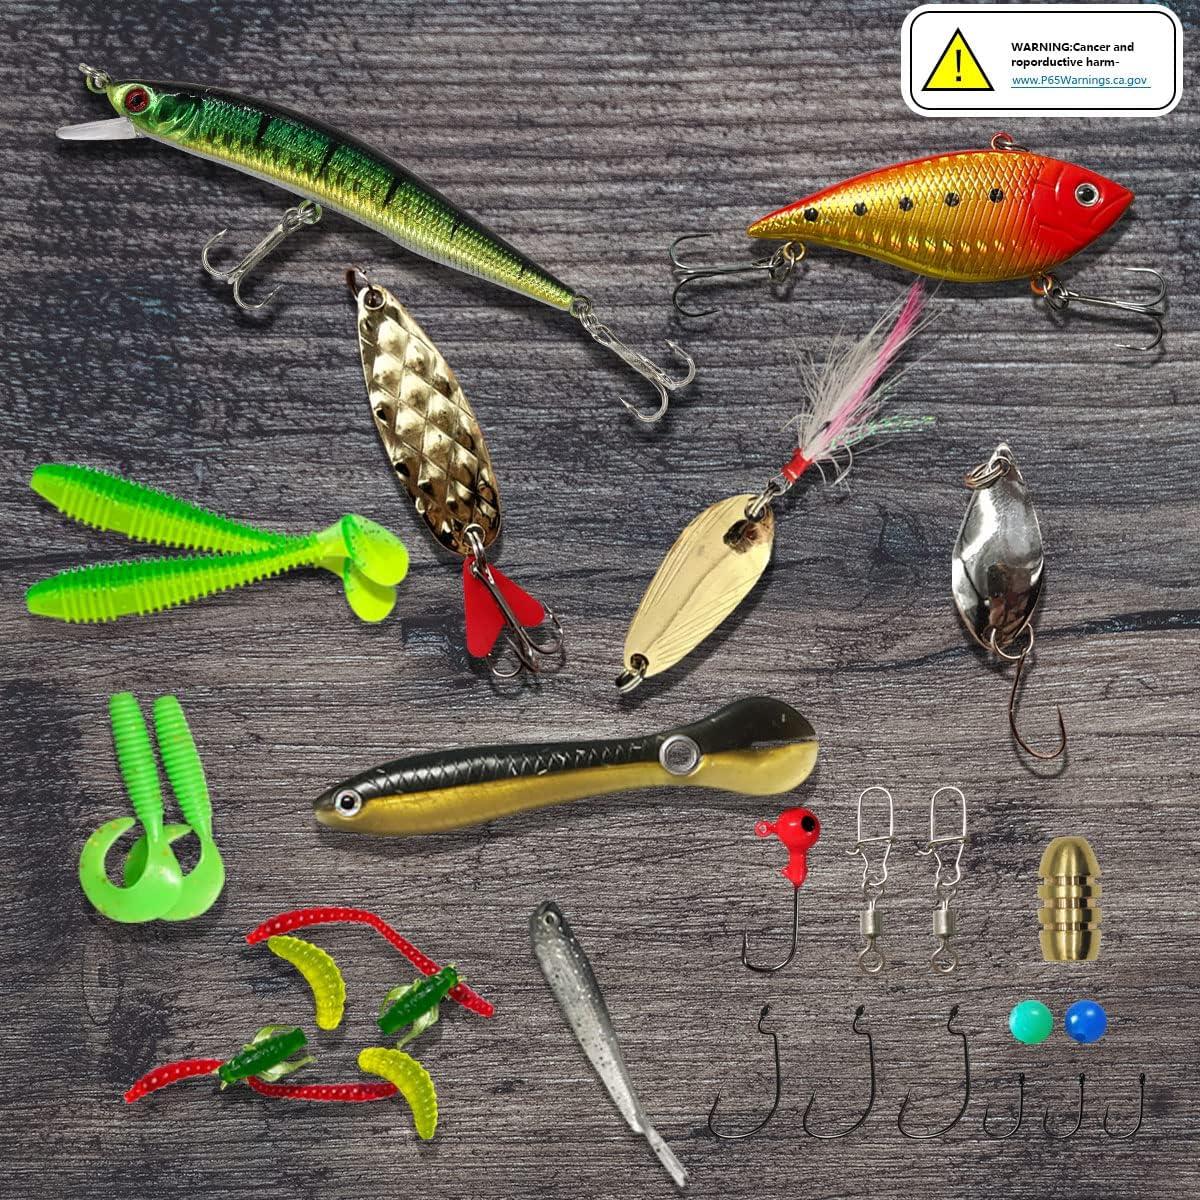 LotFancy Spinner Baits Fishing Lures with 2 Portable Tackle Boxes - Pack of 10